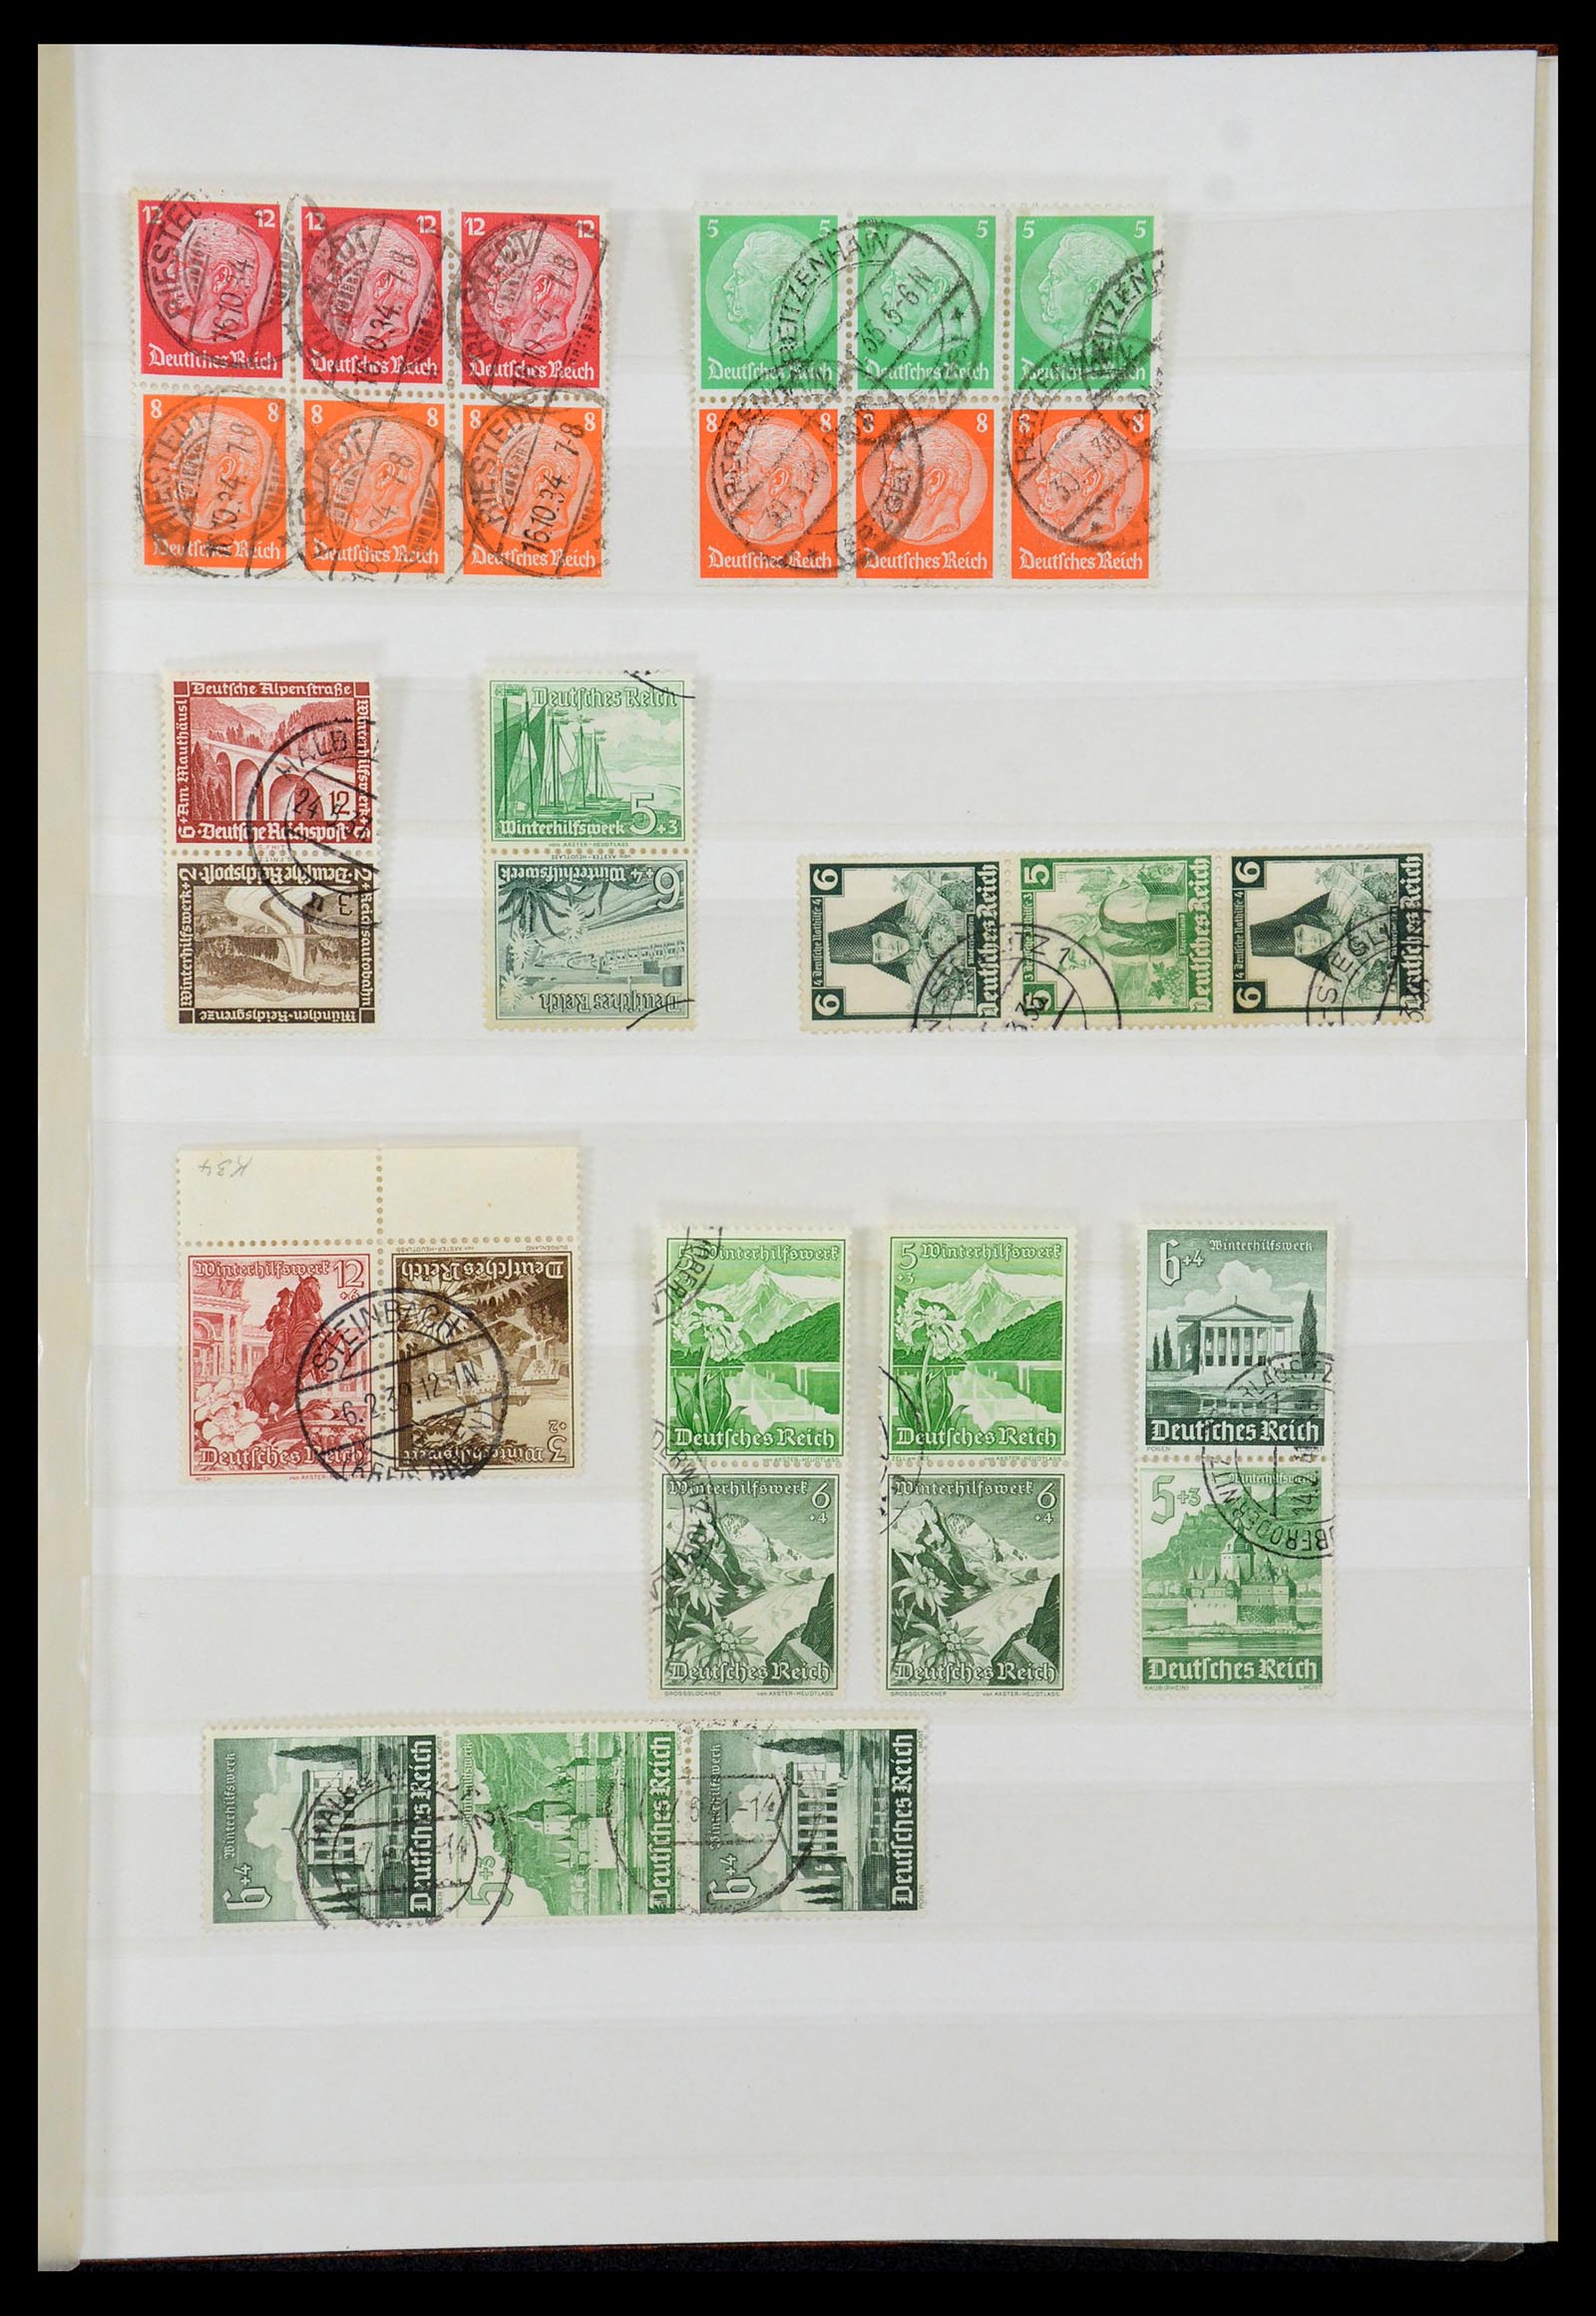 35530 019 - Stamp Collection 35530 German Reich 1872-1944 canceled.